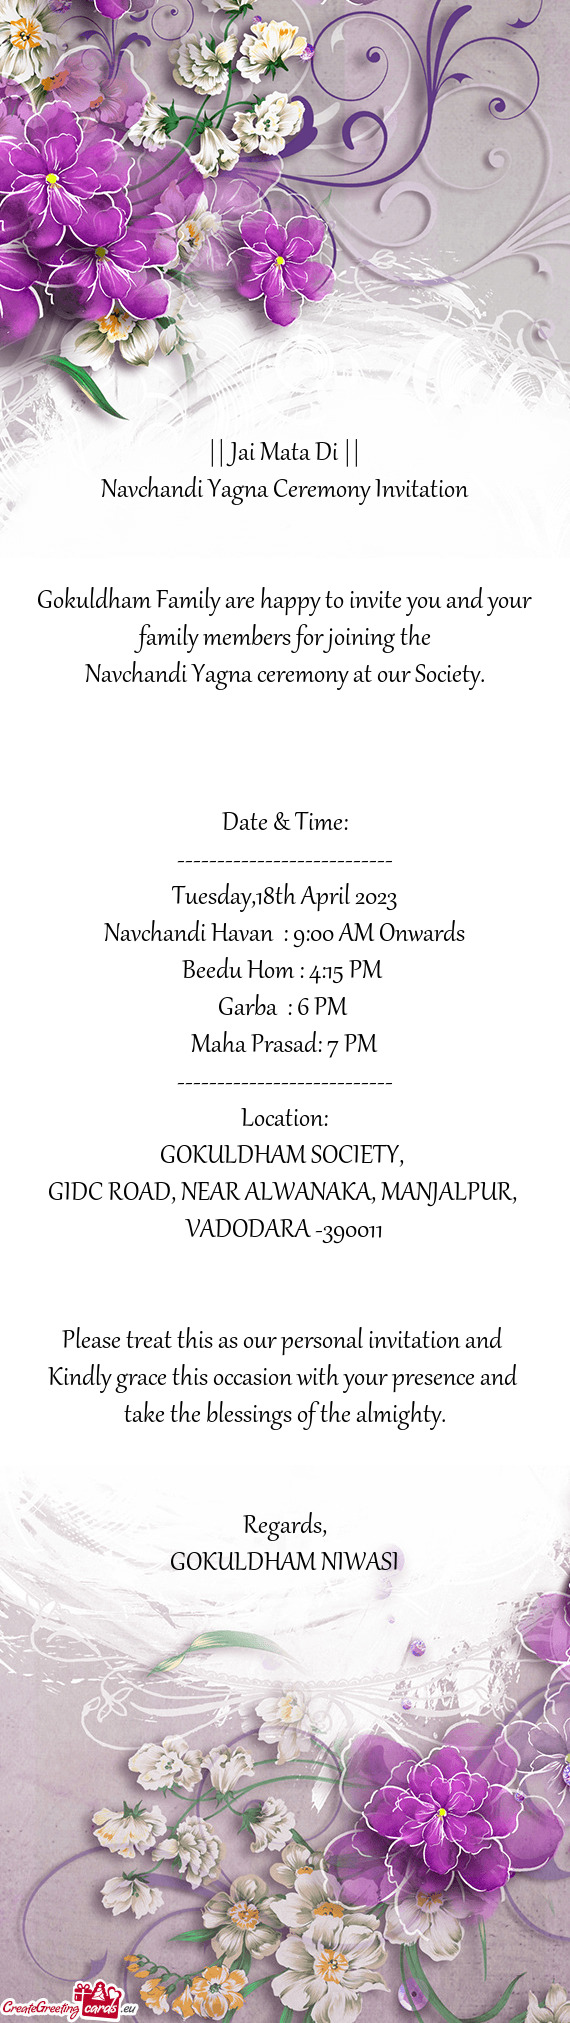 Gokuldham Family are happy to invite you and your family members for joining the